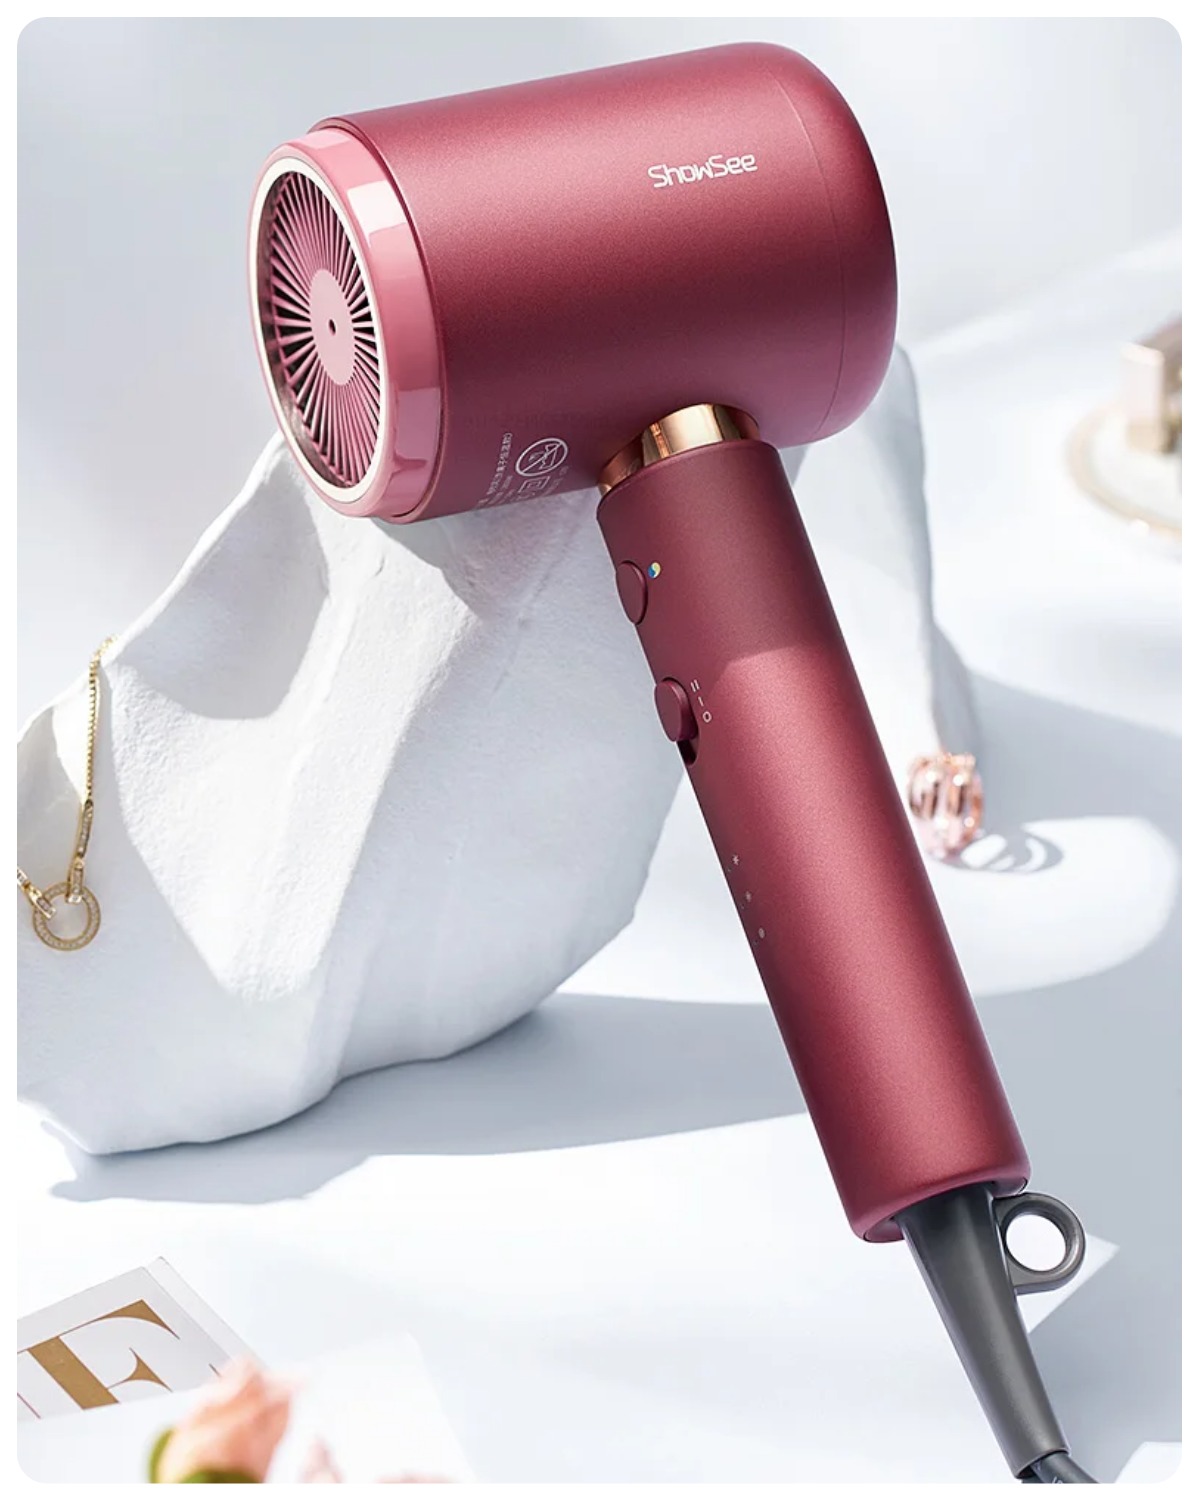 ShowSee-Hair-Dryer-A11-R-04